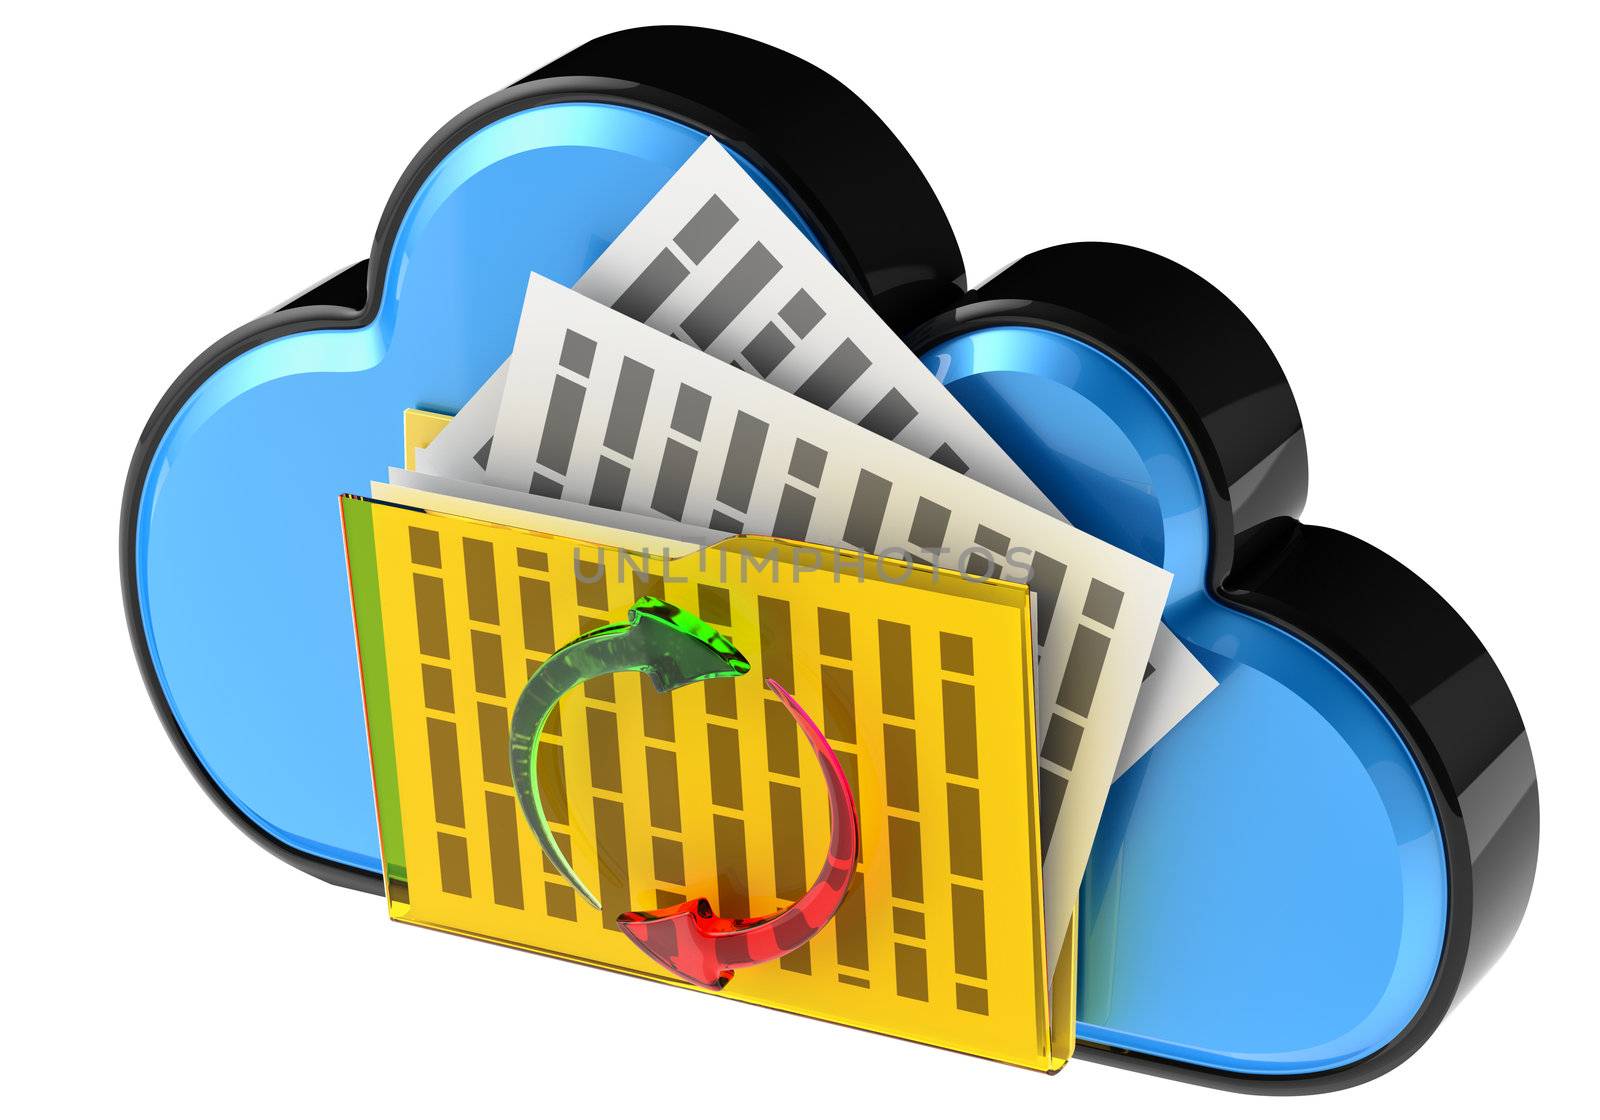 Cloud computing and storage security concept by merzavka